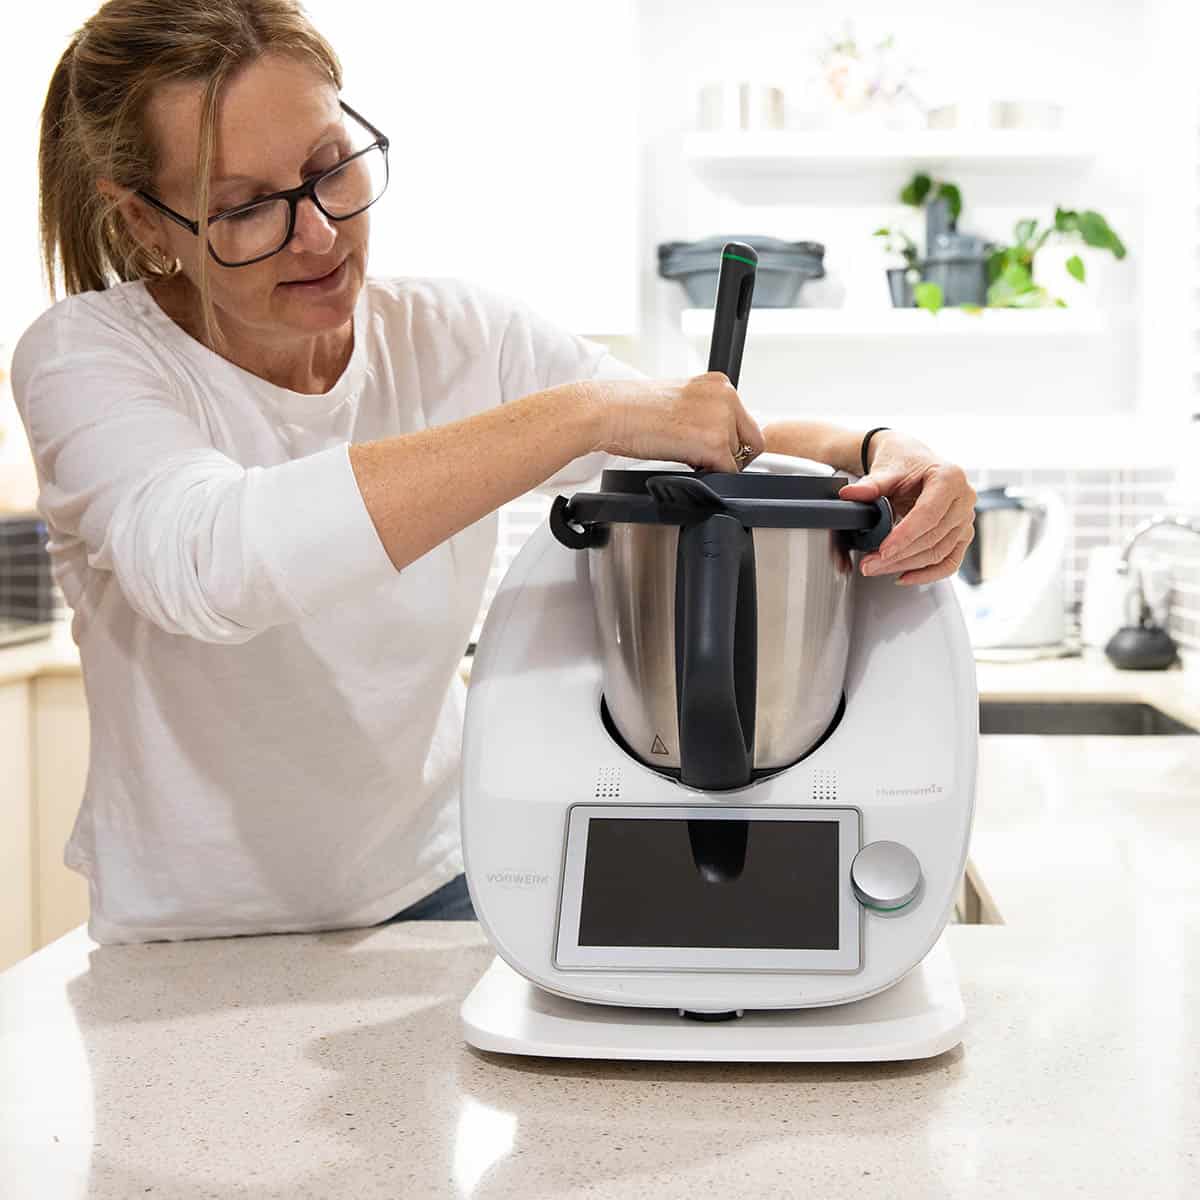 Welcome to Thermokitchen Julie Carlyle profile and Thermomix